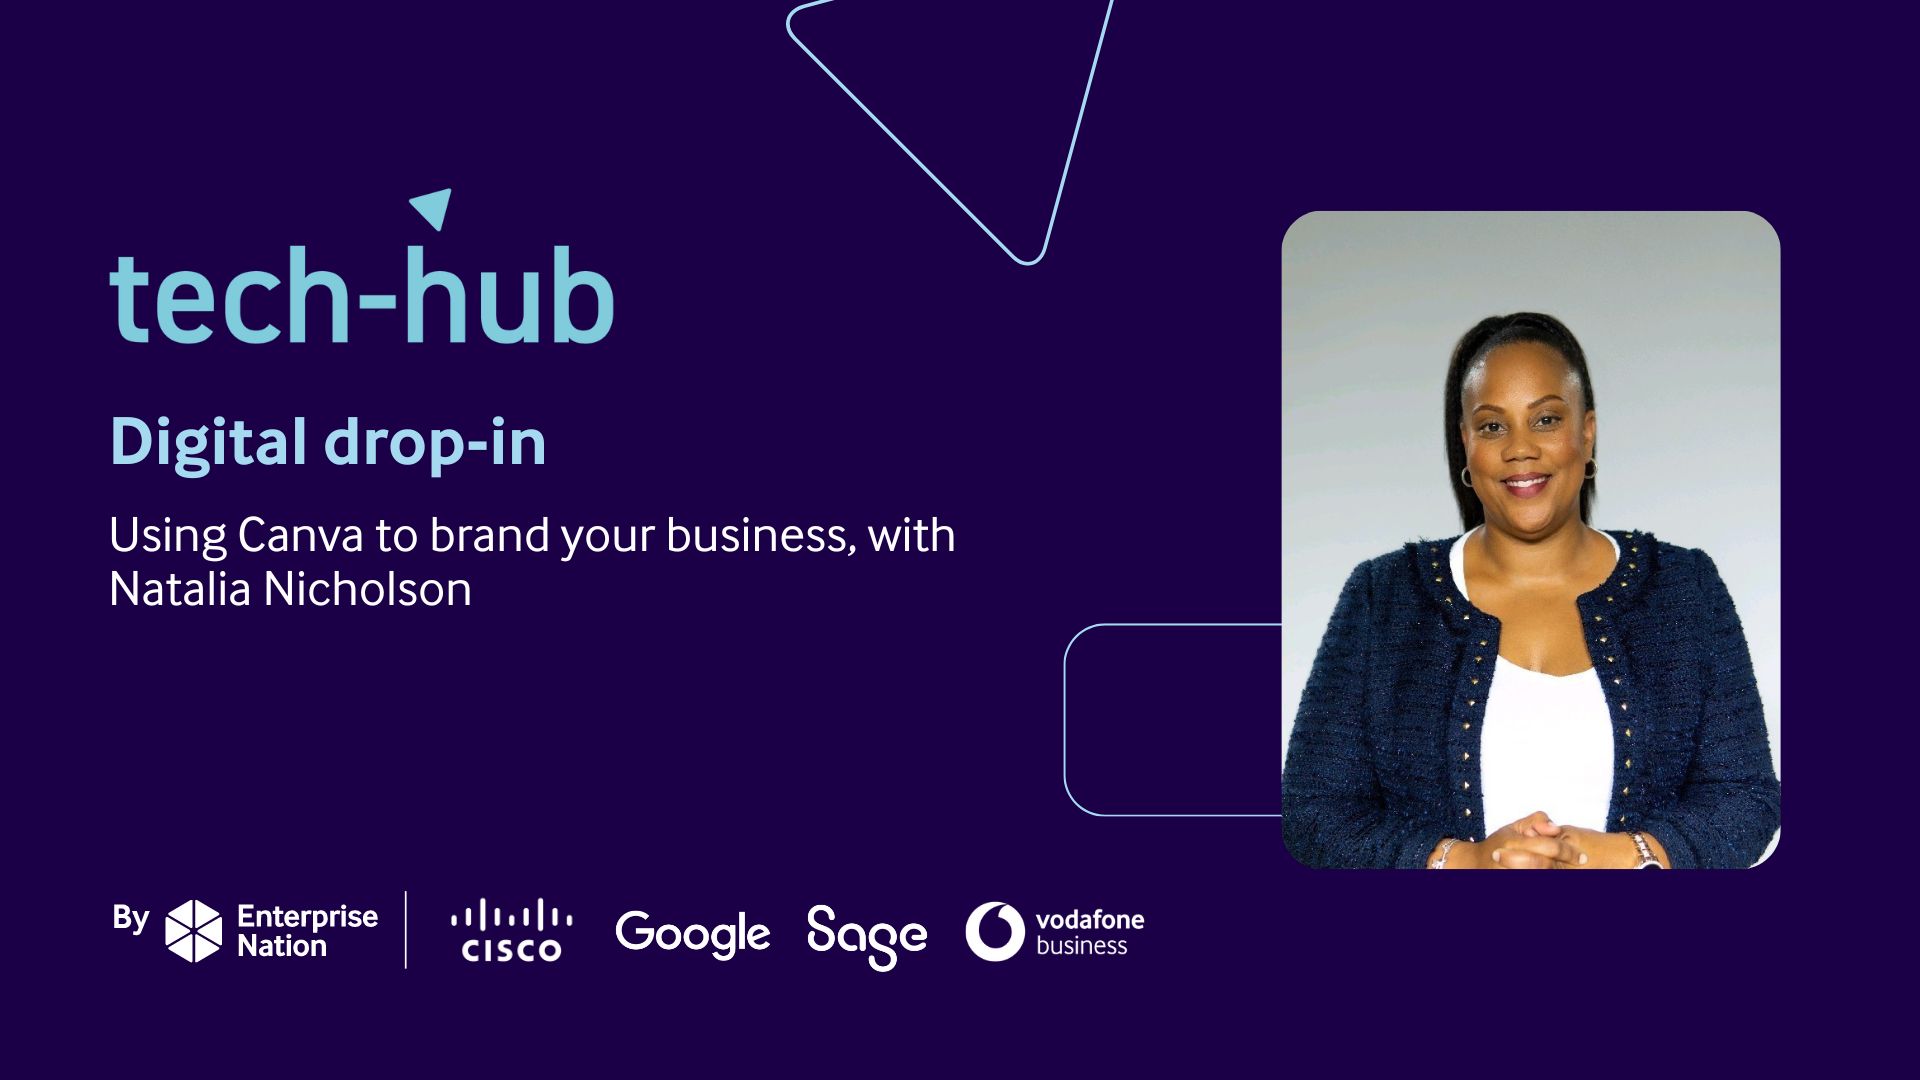 Tech Hub digital drop-in: Using Canva to brand your business